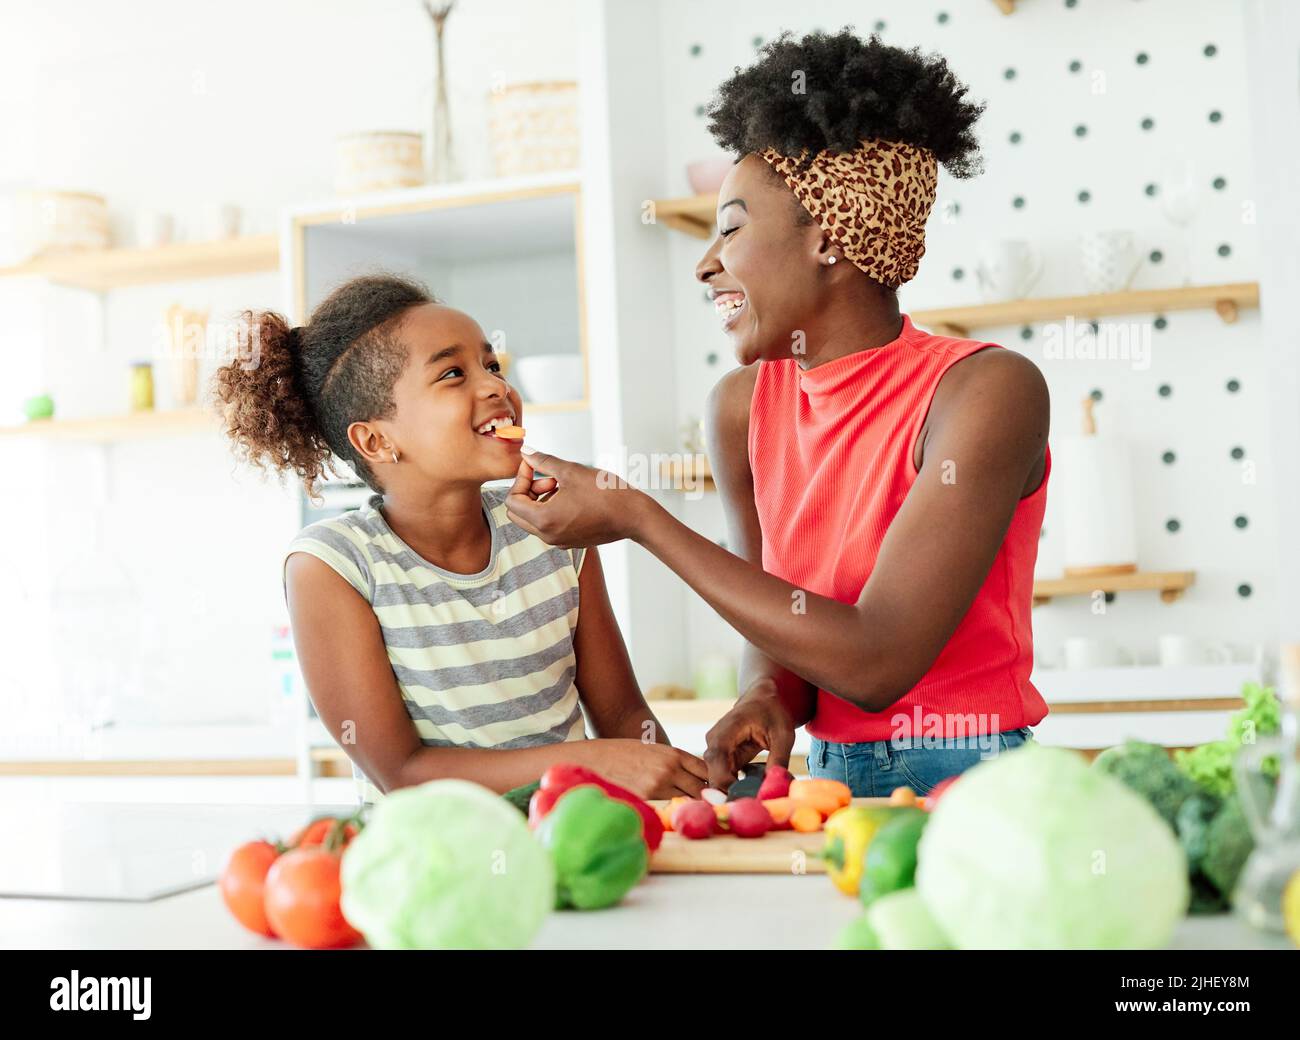 daughter mother kitchen food preparing cooking child bonding happy girl together home parent Stock Photo